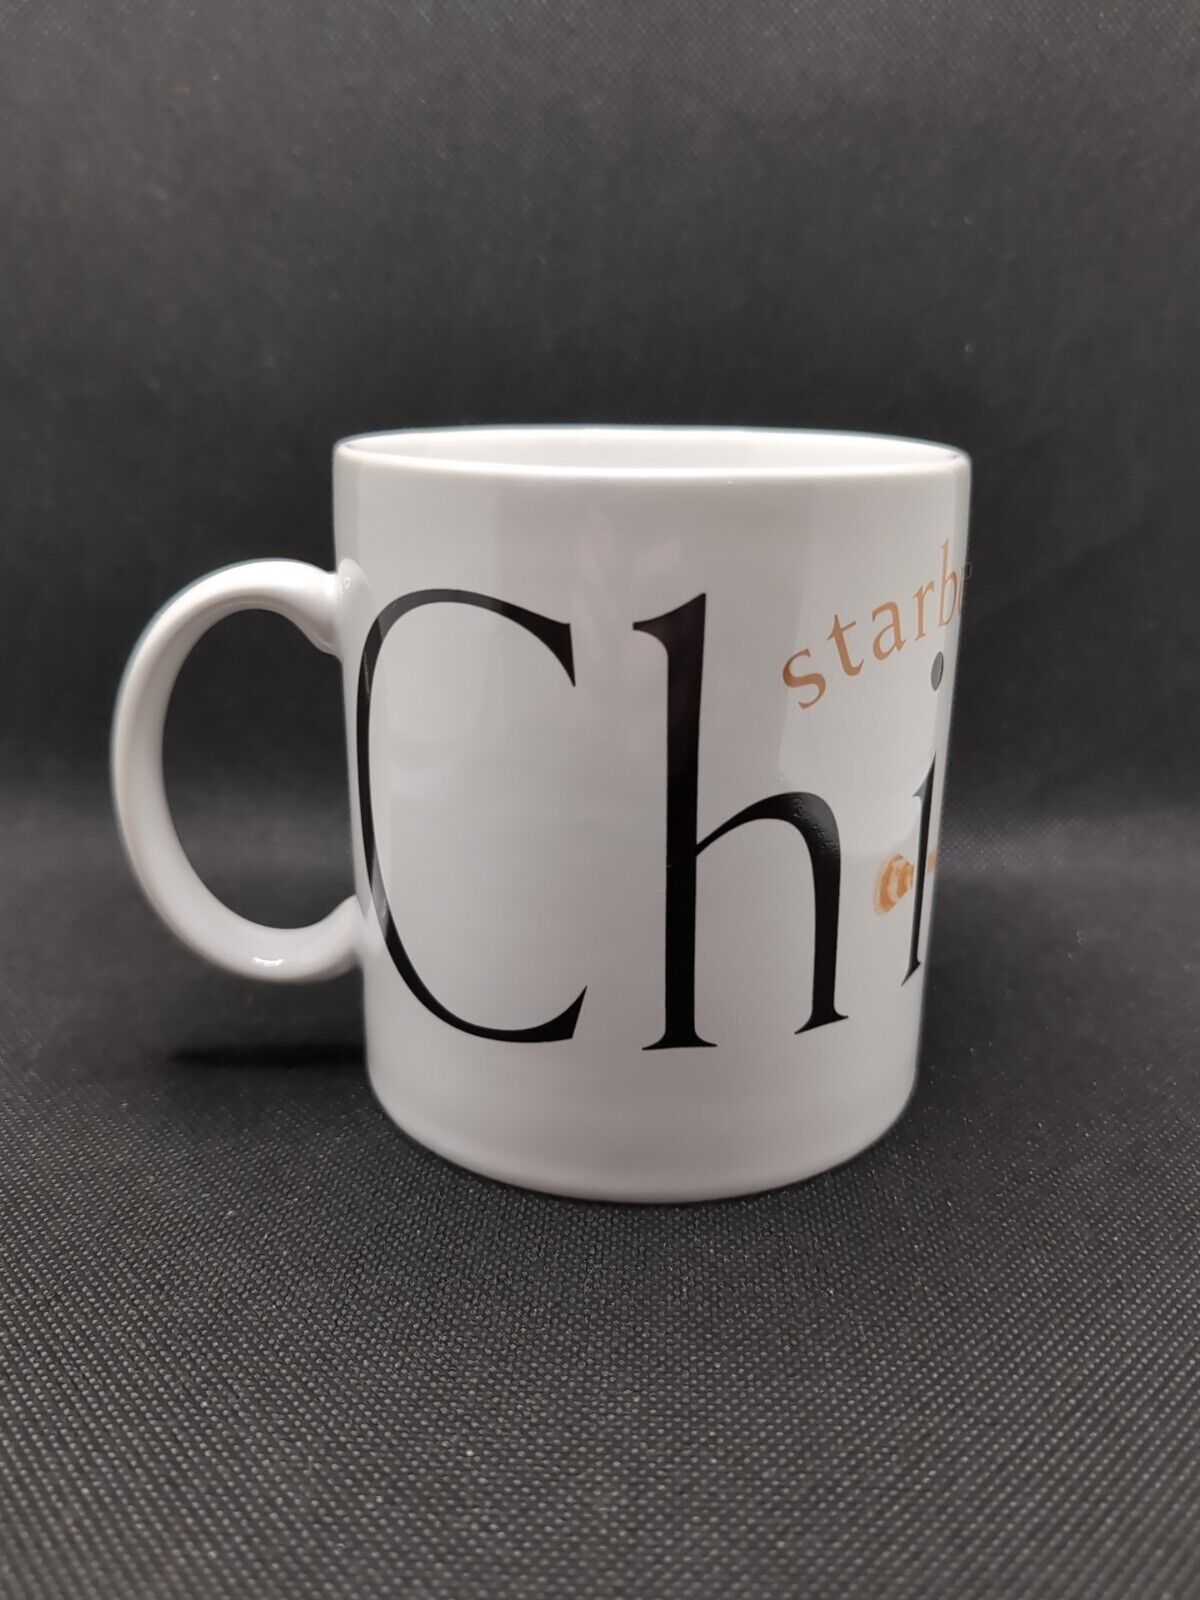 VTG 1994 STARBUCKS Oversized Coffee Cup CHICAGO CITY MUG Collector Series